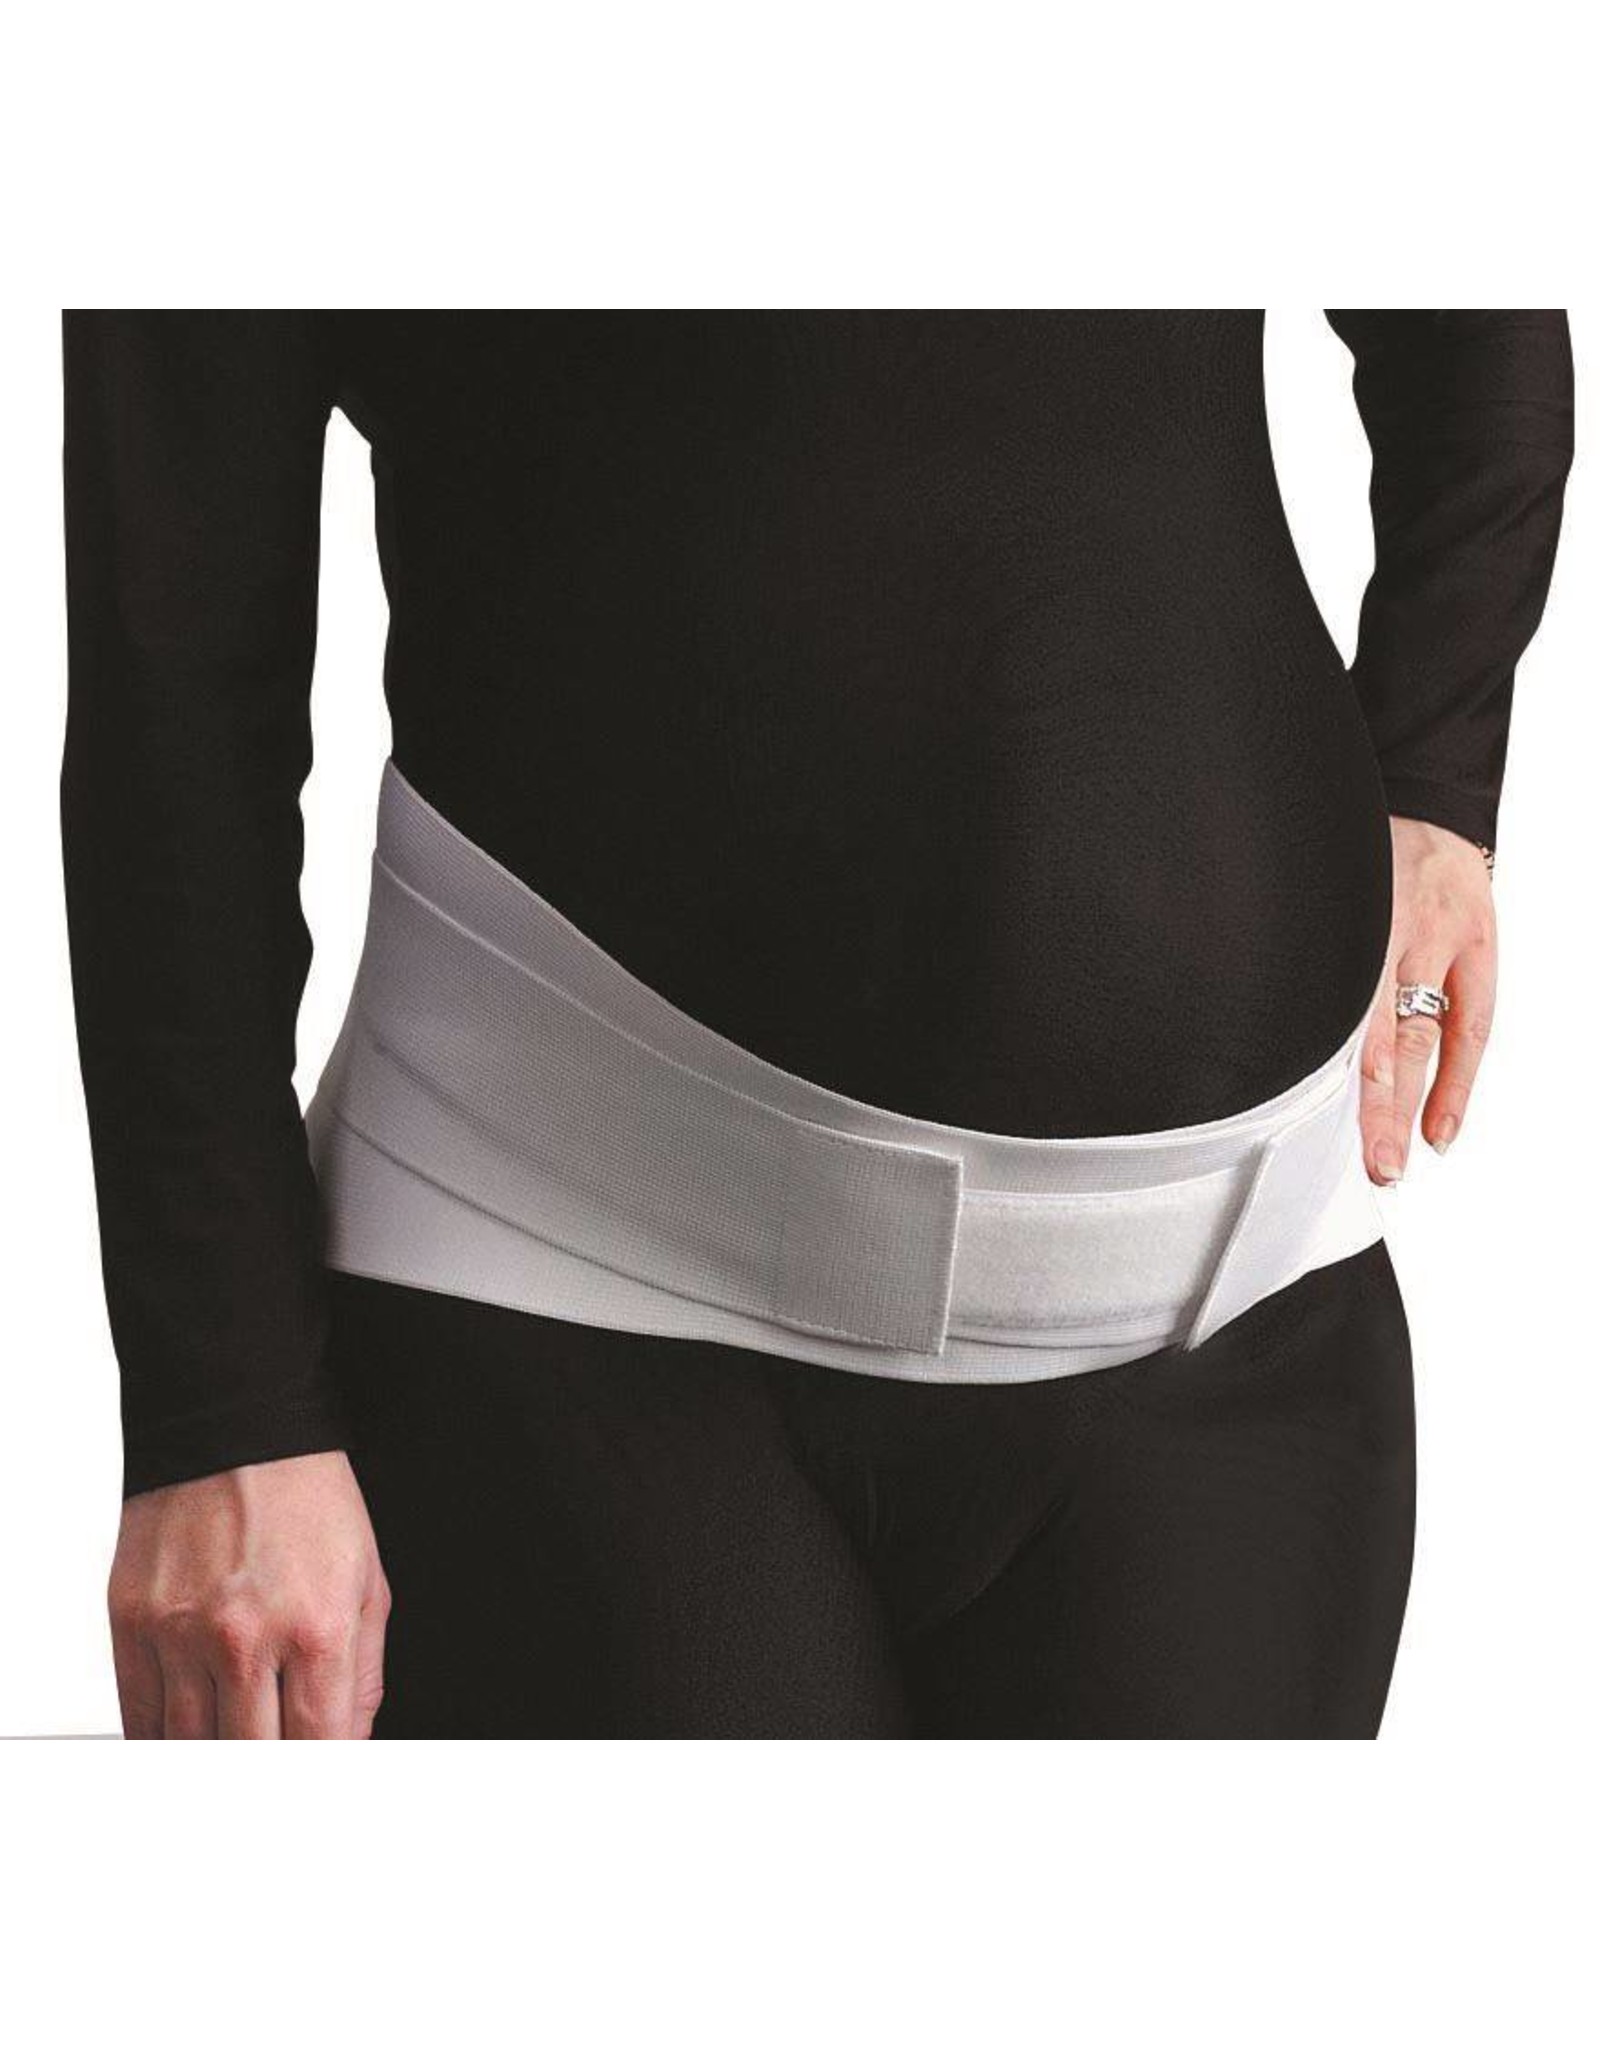 Trulife Embrace Moderate Support Maternity Belt